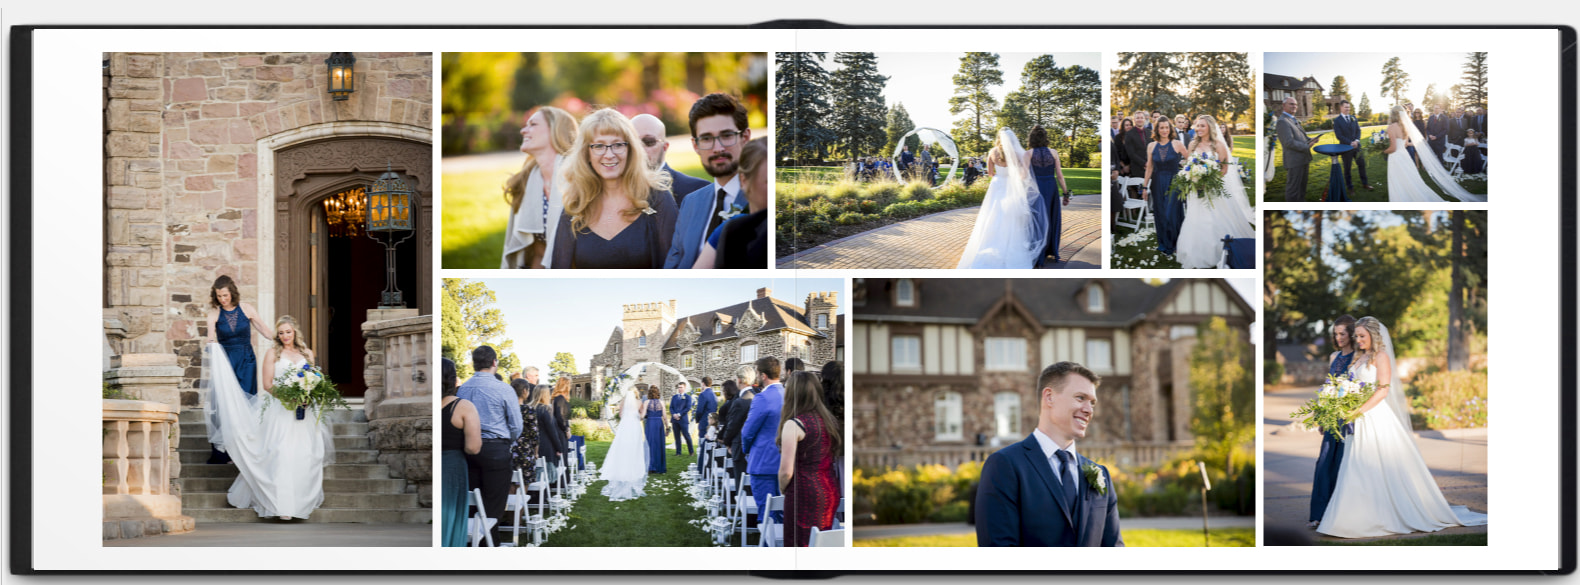 A preview of the inside spread of a wedding album featuring emotional moments from a wedding ceremony.